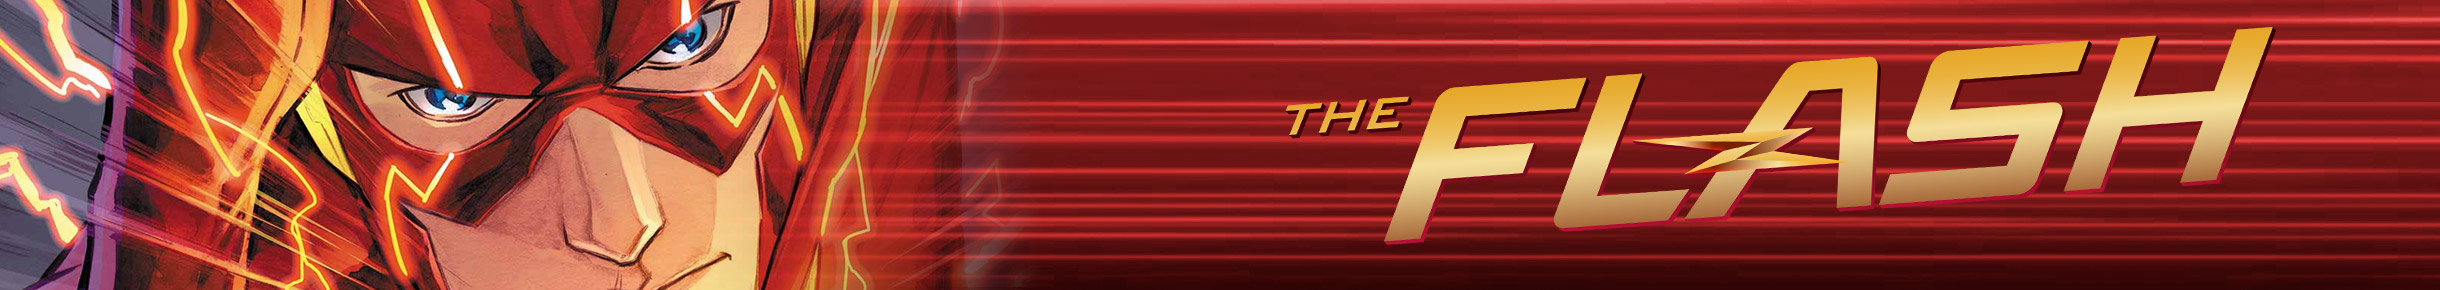 The Flash Rings Banner